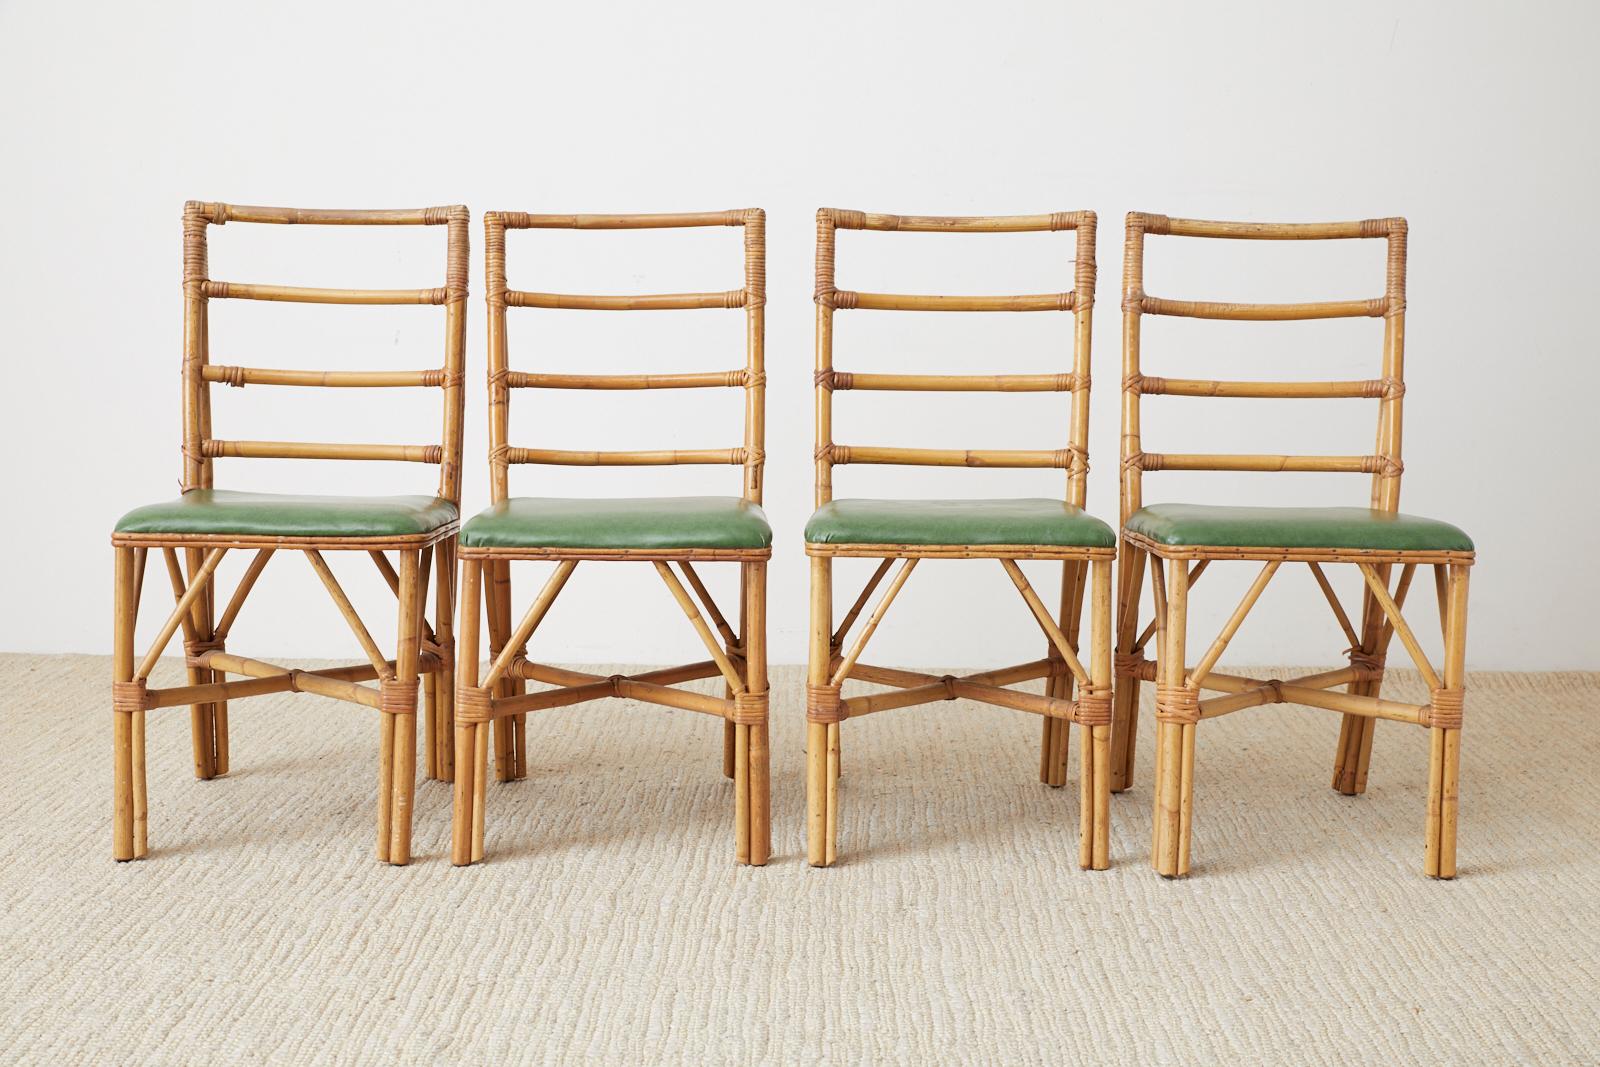 American Set of Four Midcentury Bamboo Rattan Dining Chairs